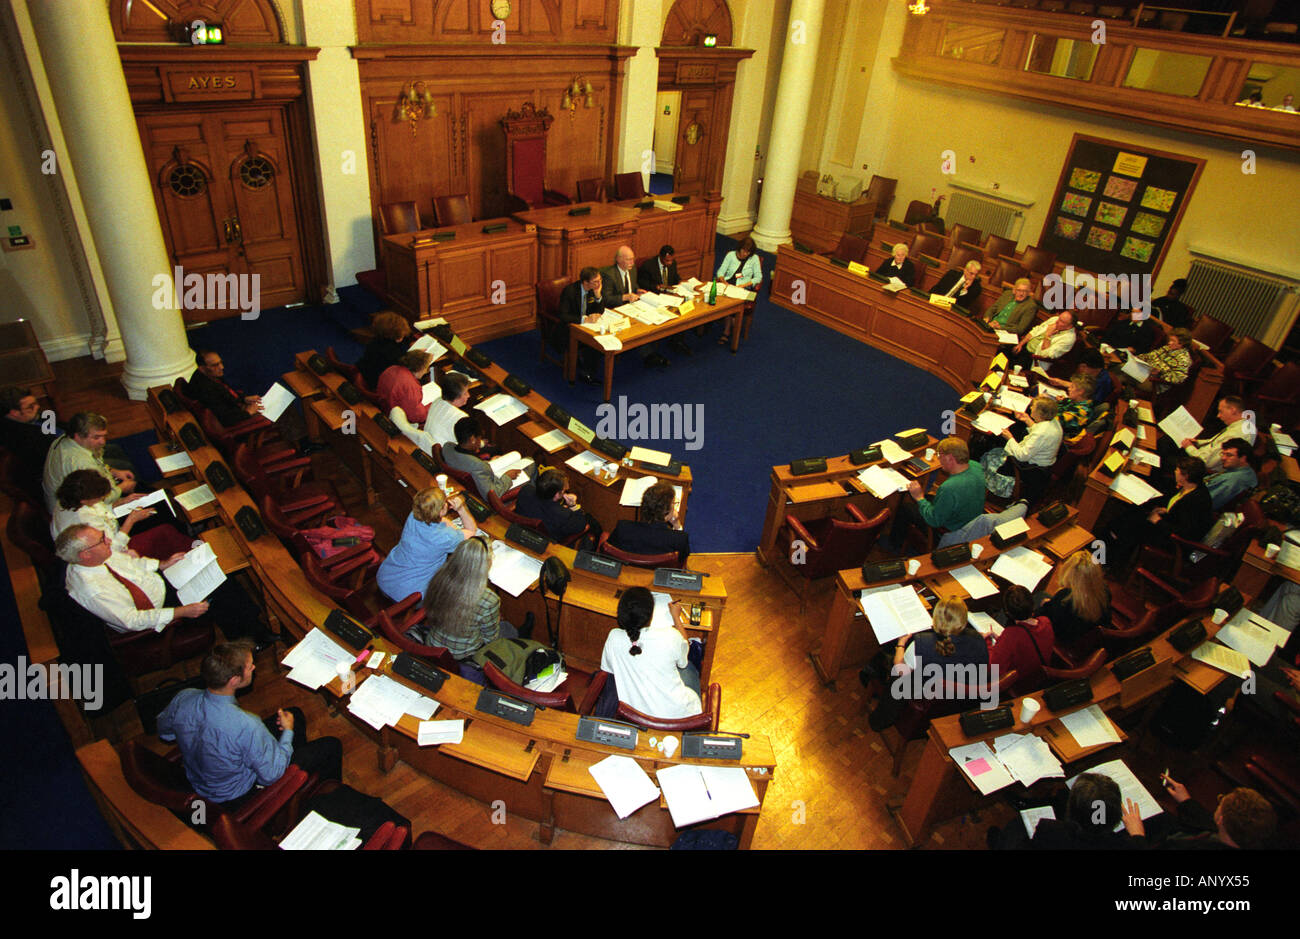 Meeting of councillors in session at Lambeth Council Town Hall, Brixton, London, UK. Stock Photo